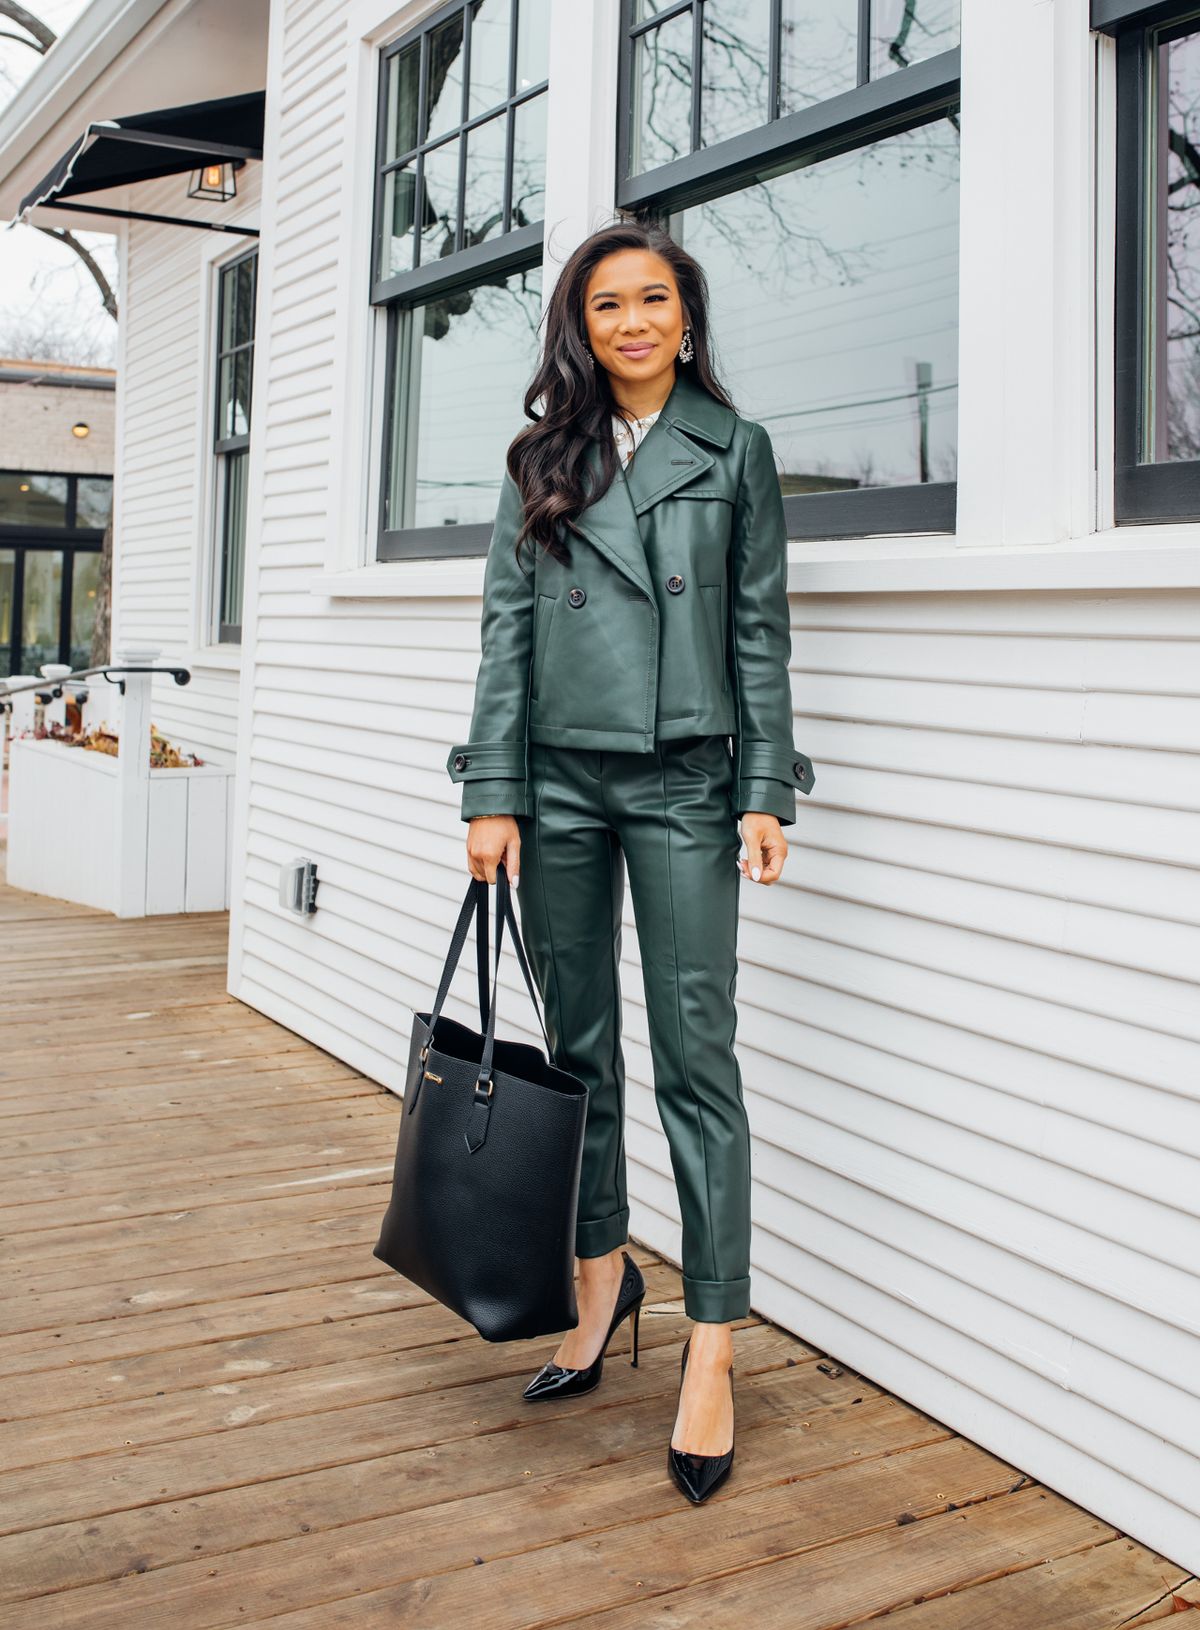 HOW TO STYLE LEATHER PANTS, OUTFIT IDEAS